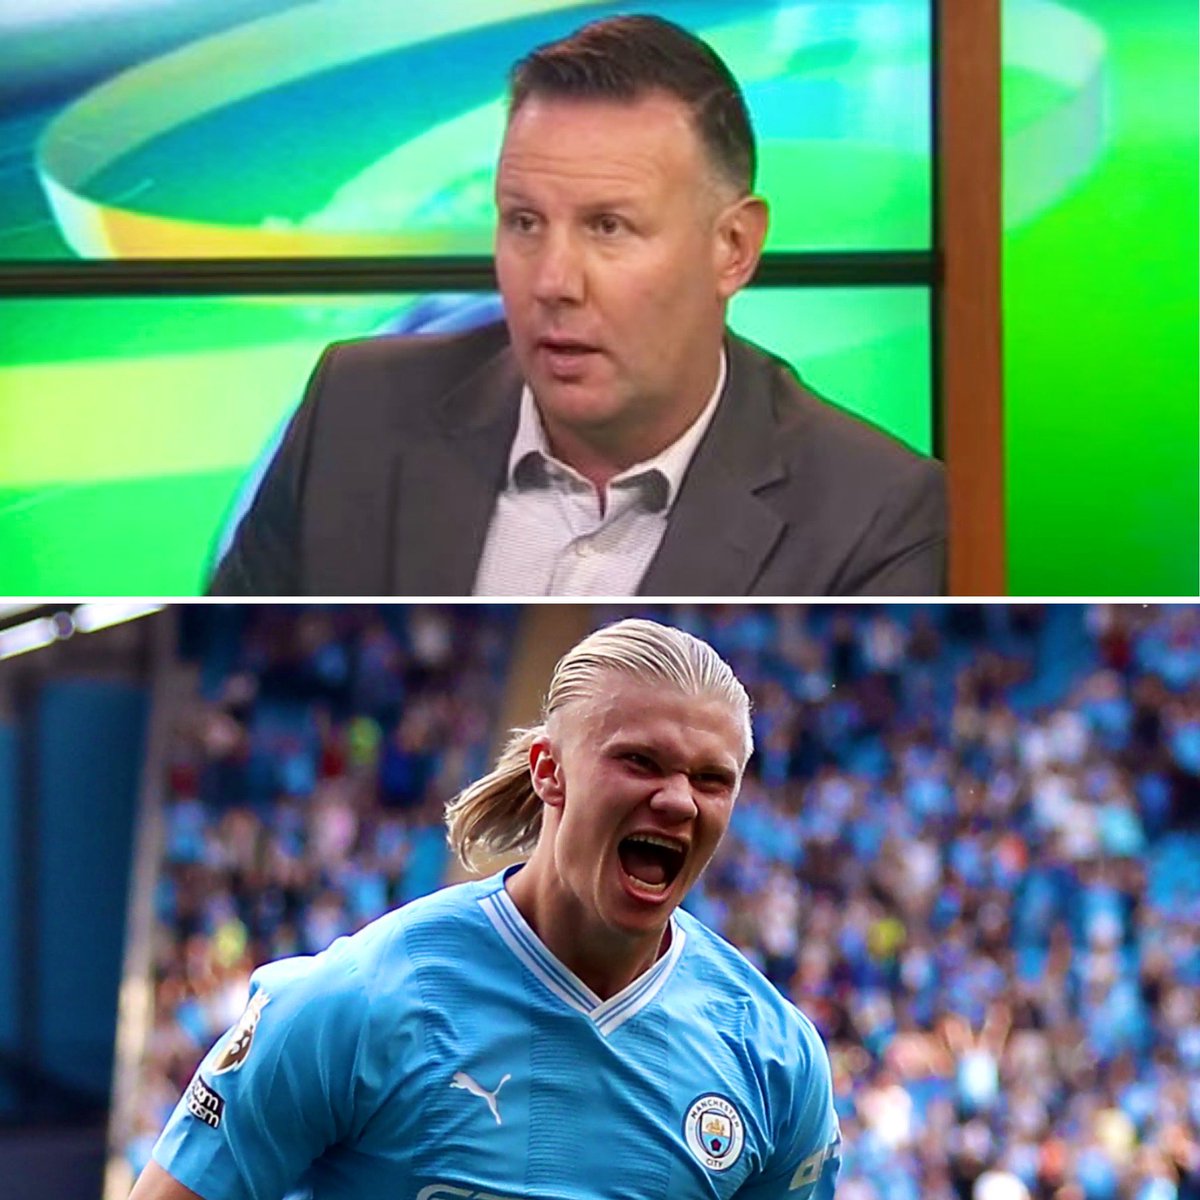 🎙️ Former player Craig Burley asks Erling Haaland to 𝗻𝗲𝘃𝗲𝗿 𝗿𝗲𝘁𝘂𝗿𝗻 to a Ballon d'Or ceremony if he doesn't win it this year! ❌

'If Erling Haaland doesn't win the Ballon d'Or, 𝙘𝙡𝙤𝙨𝙚 𝙩𝙝𝙚 𝙨𝙝𝙤𝙥!

Lionel Messi has won the World Cup and it's a great achievement,